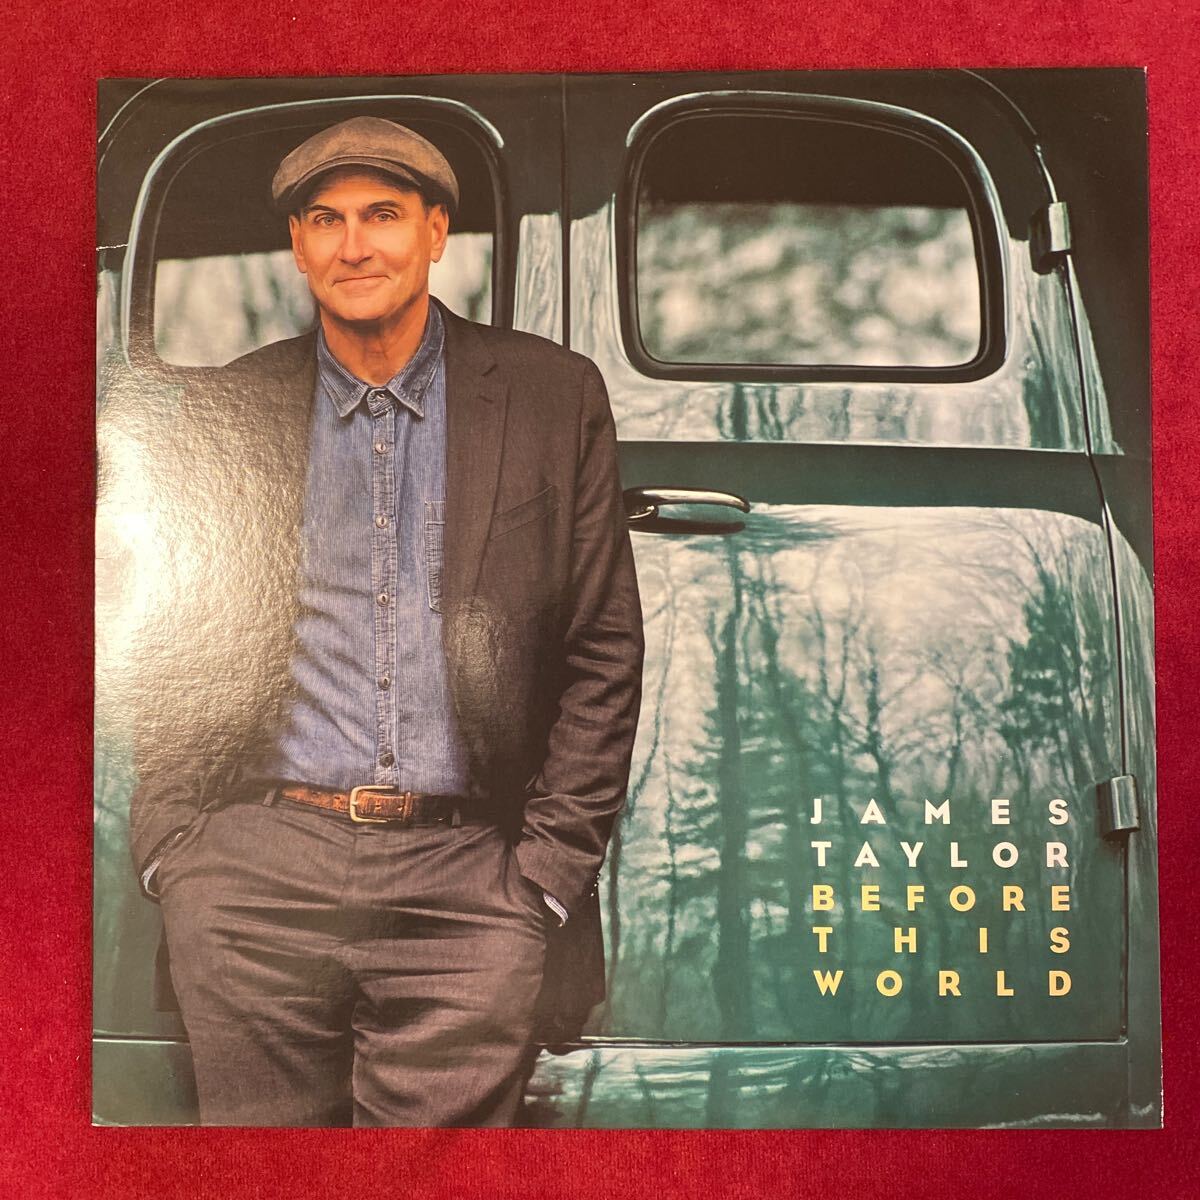 LP ジェームス・テイラー JAMES TAYLOR BEFORE THIS WORLD 重量盤_画像1